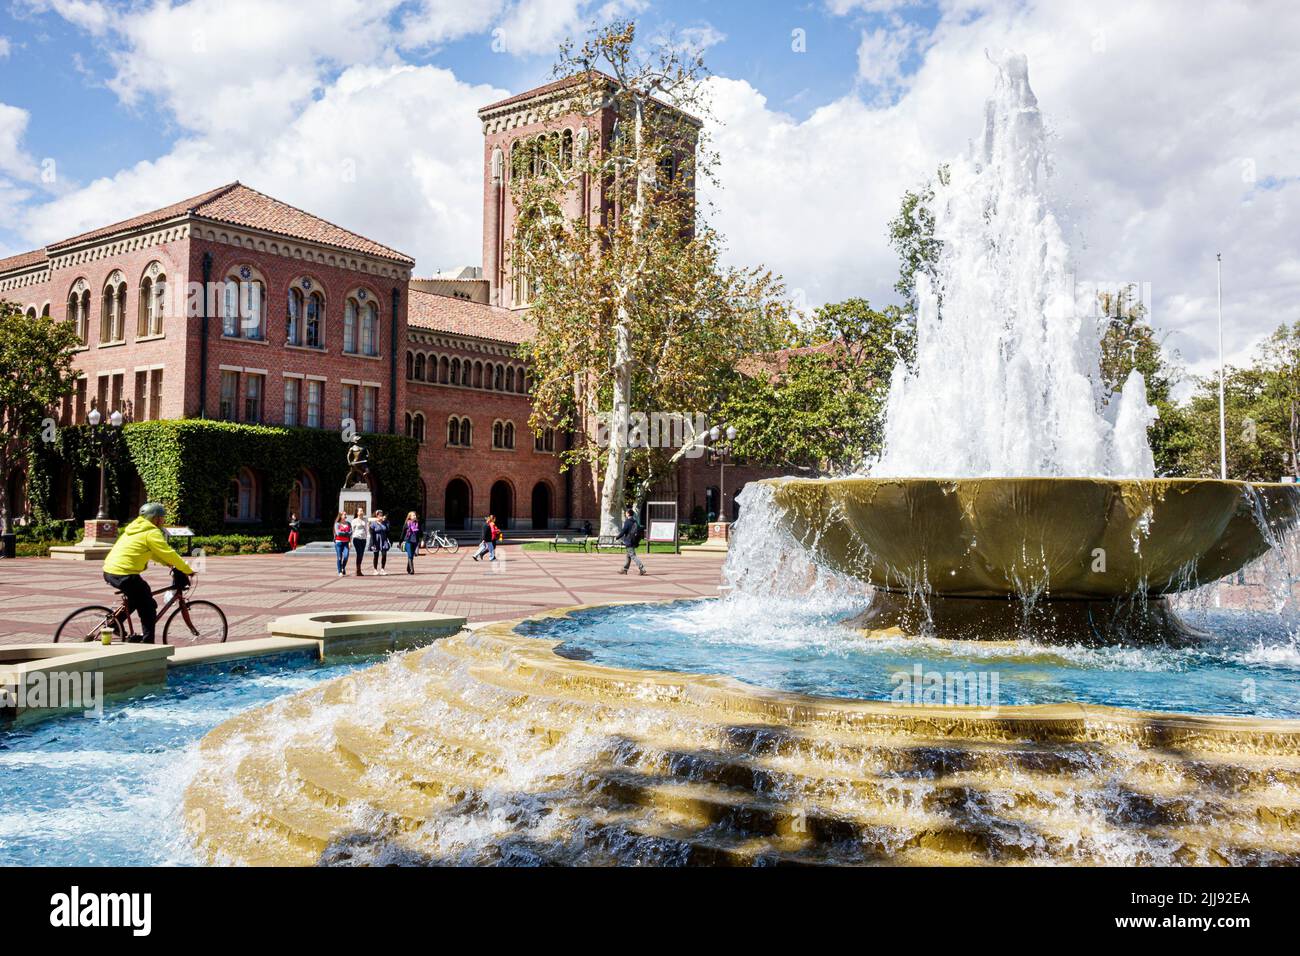 Los Angeles California,USC University of Southern California campus,Hahn Central Plaza Bovard Administration Building Shumway Fountain students biking Stock Photo